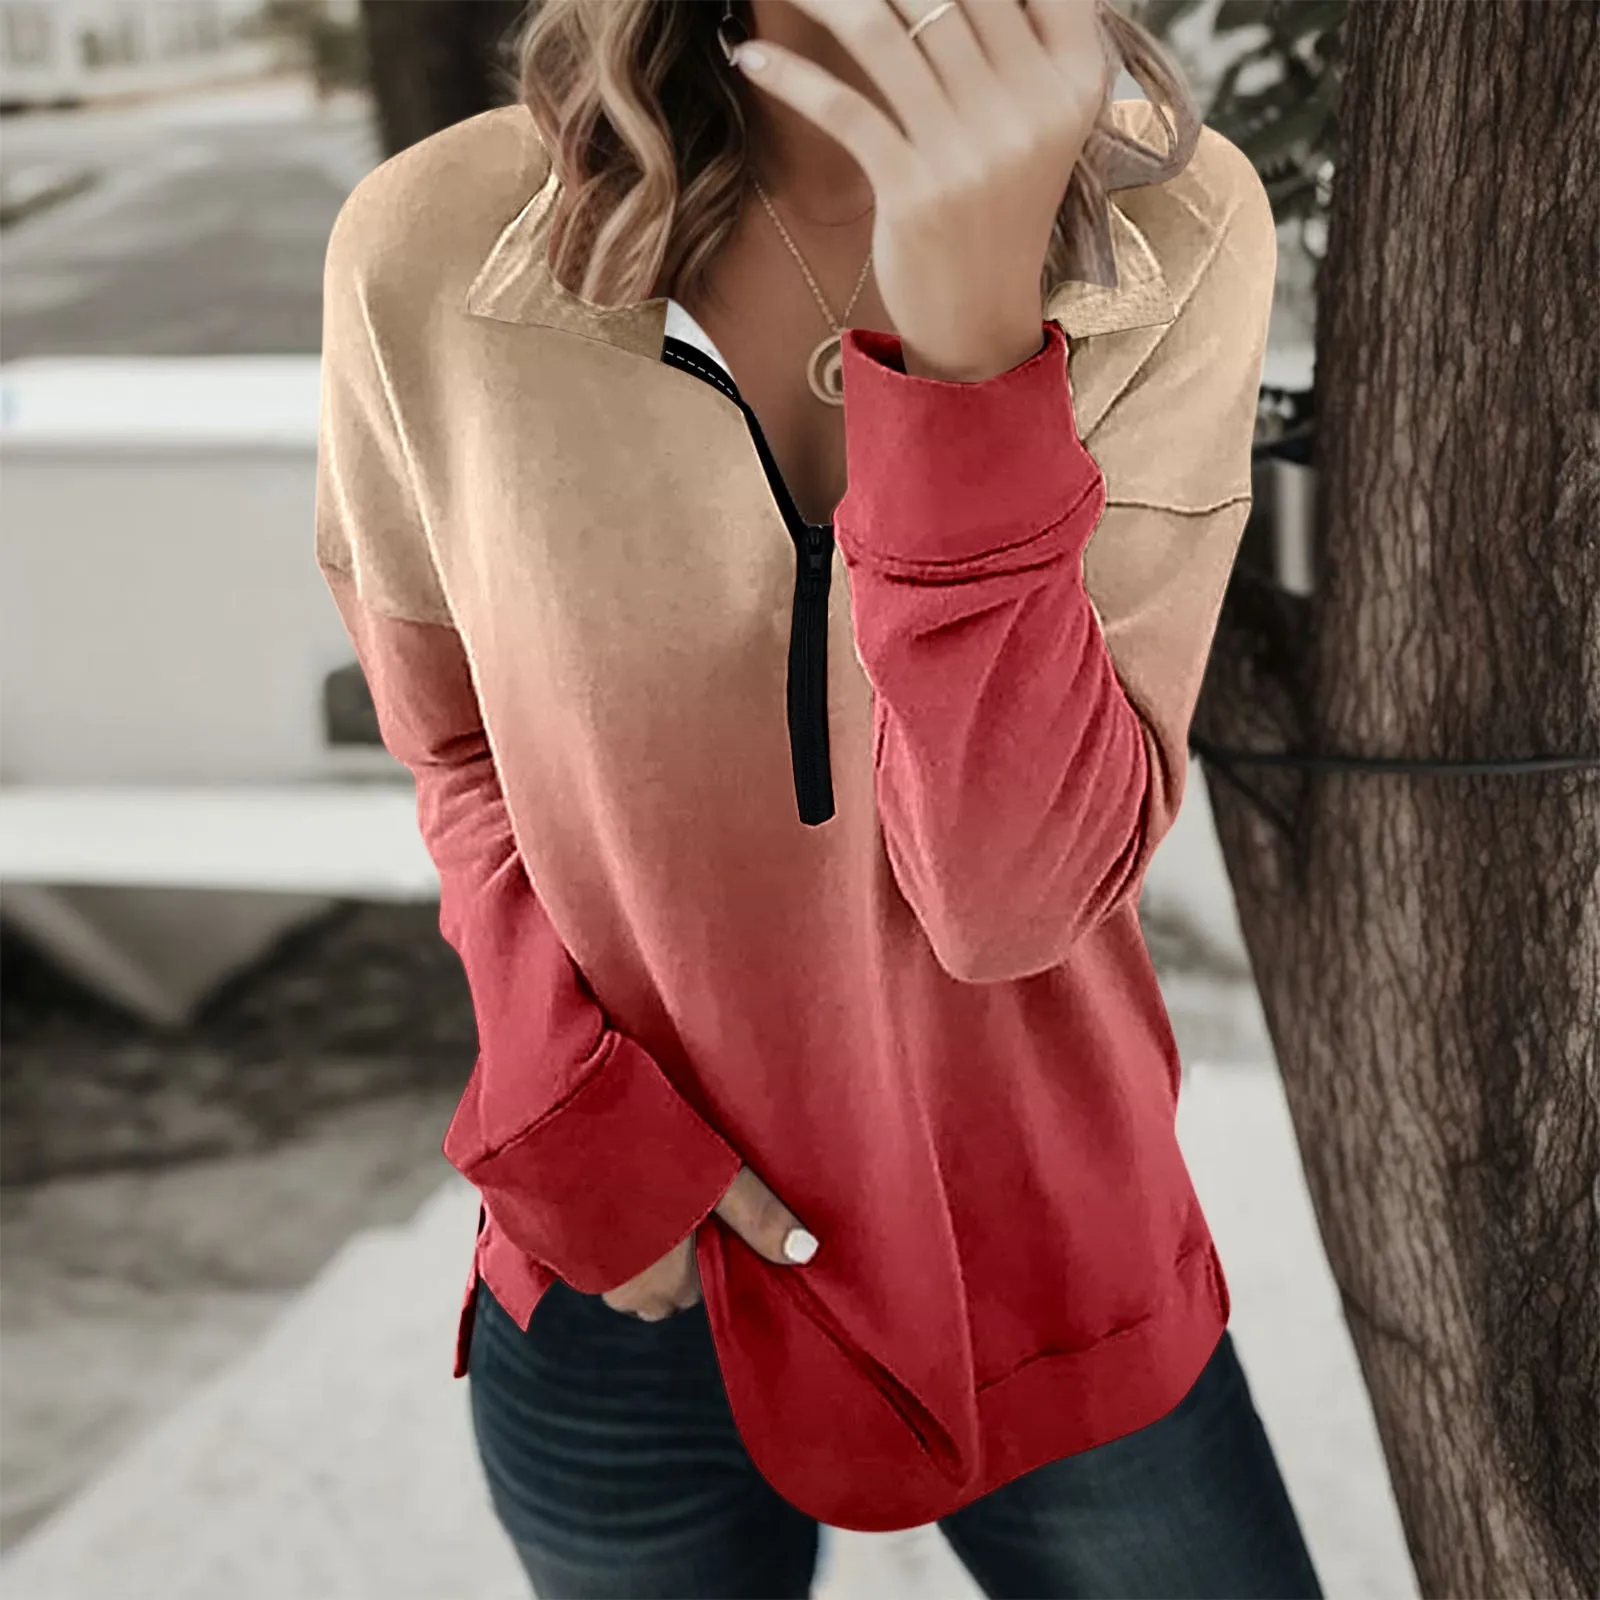 

Quarter Zip Pullover Women Fashion Fall Floral Print Loose Fit Sweatshirt Zip Up Long Sleeve Clothes Cropped Sweater Set